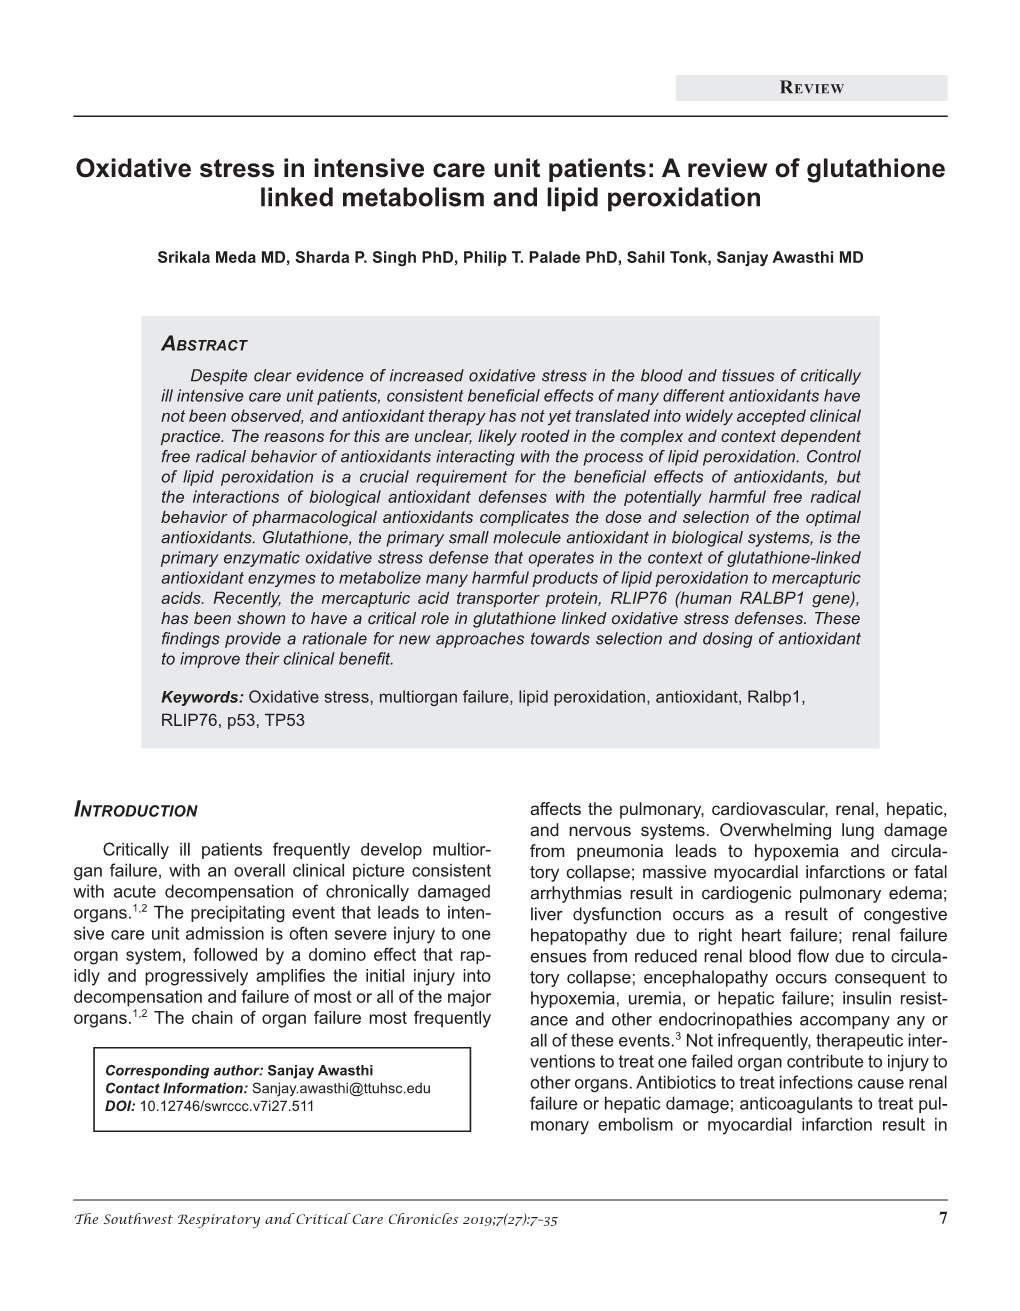 A Review of Glutathione Linked Metabolism and Lipid Peroxidation